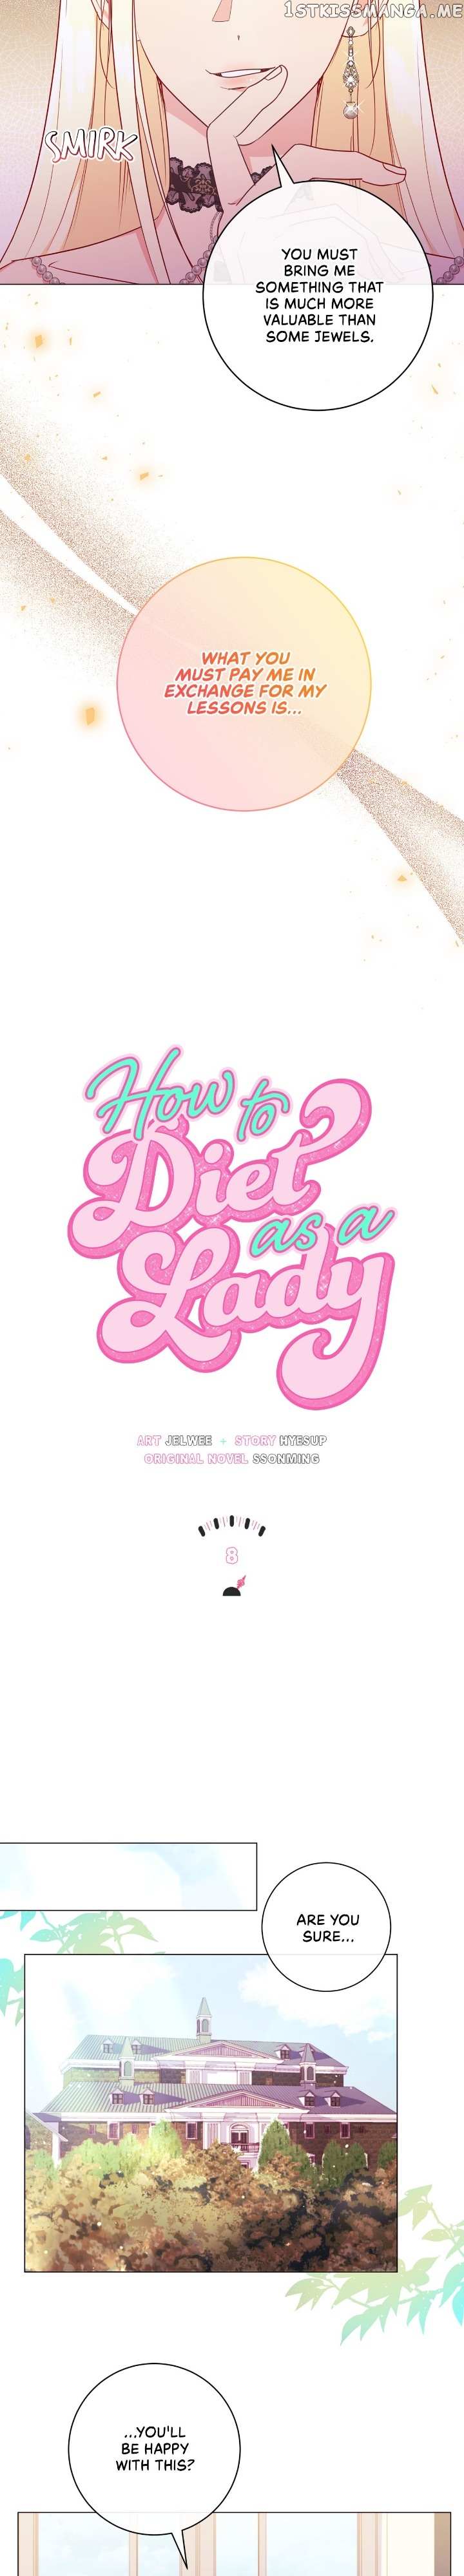 How To Diet As A Lady - Page 2